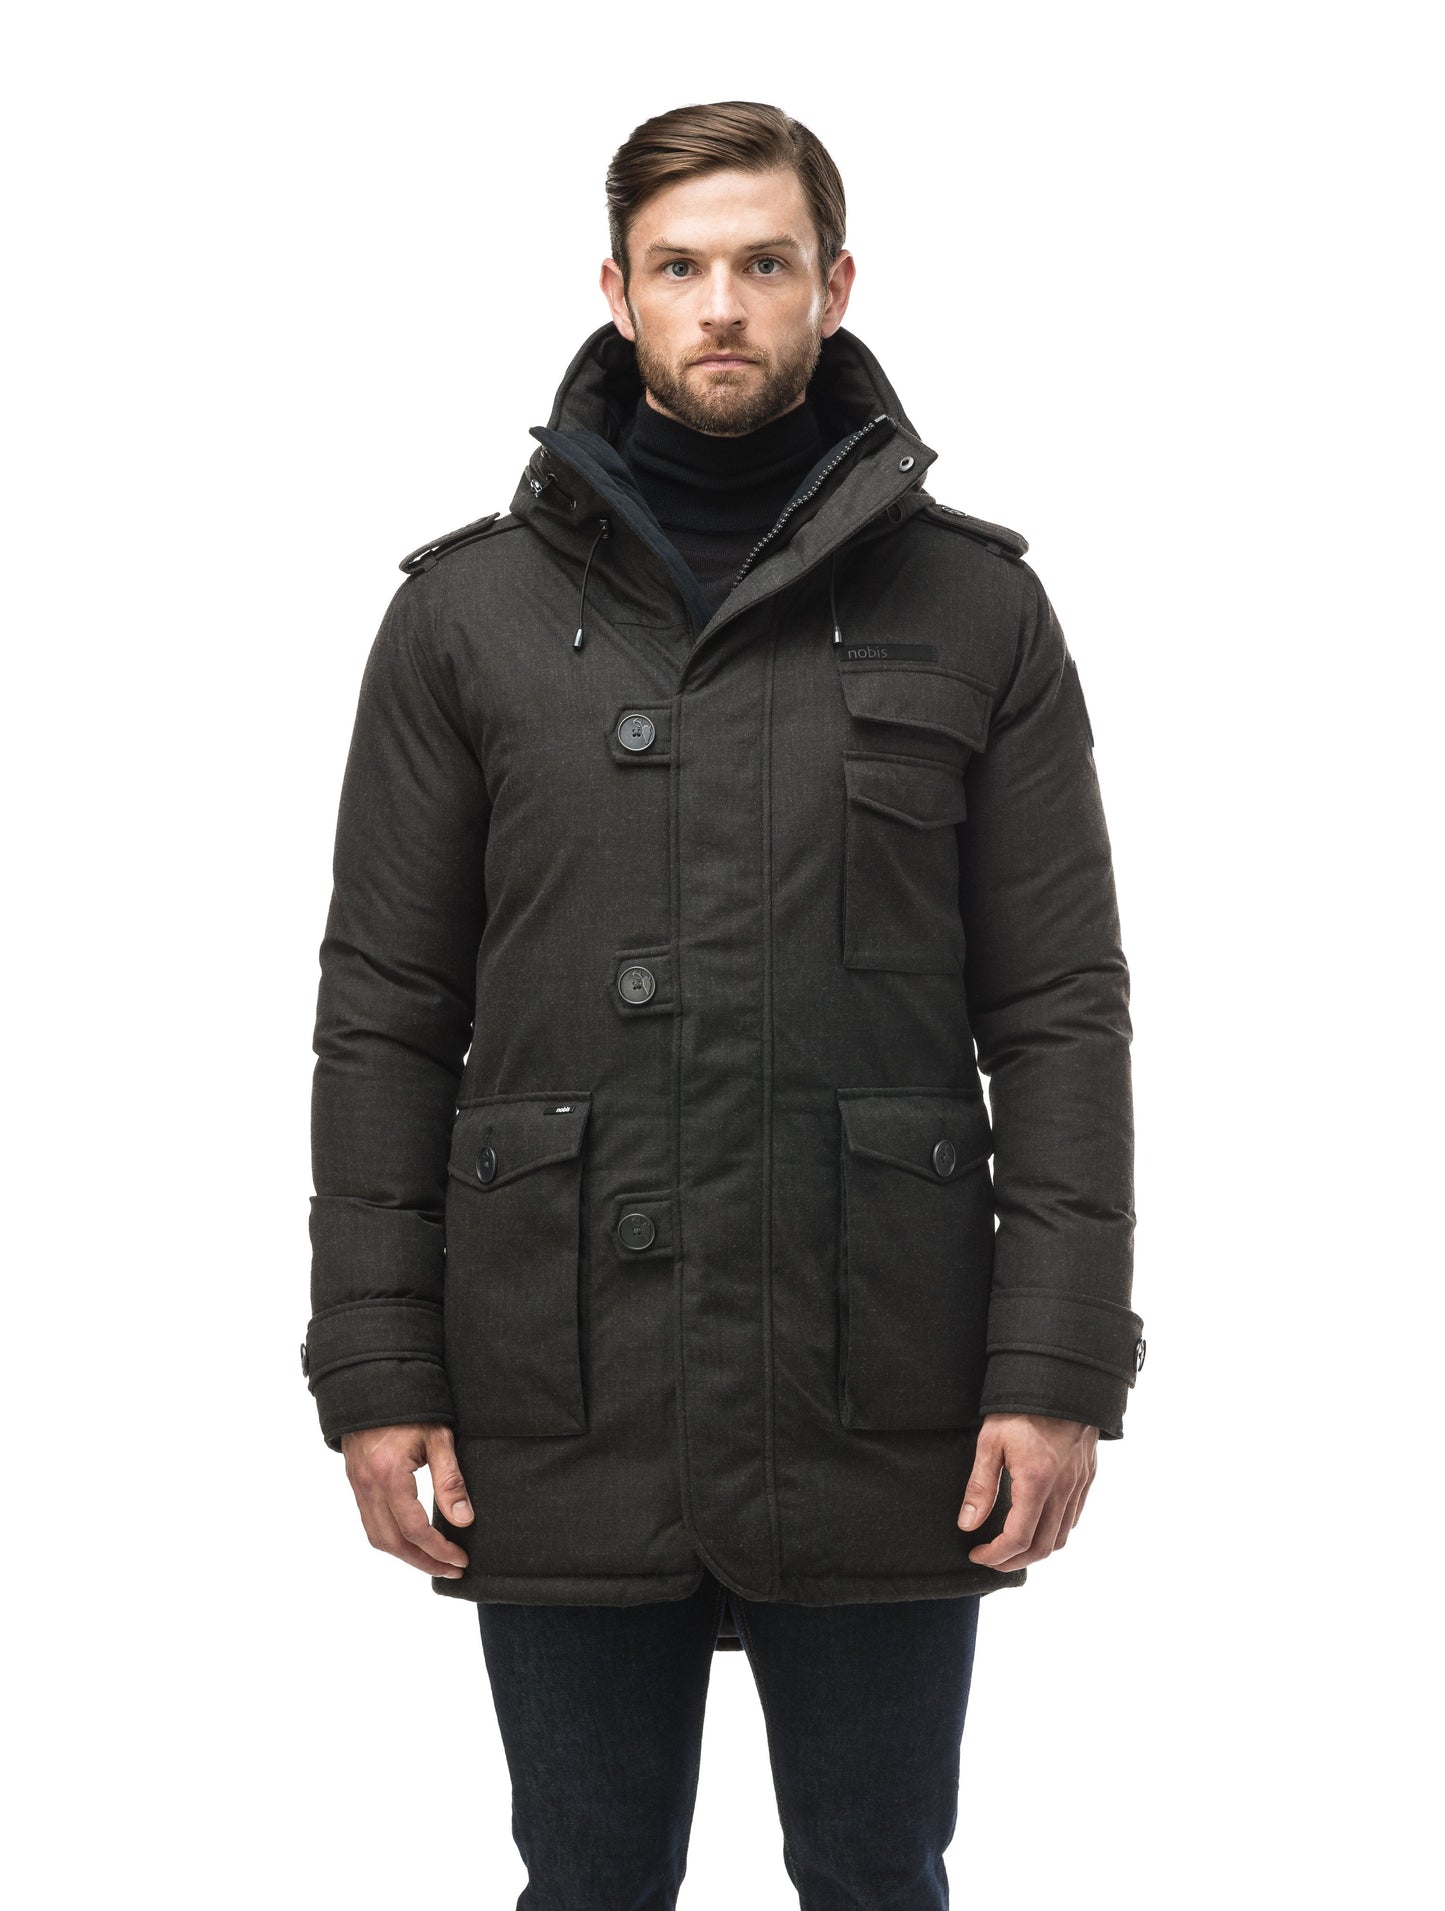 Men's down filled parka with faux button magnet closures and fur free hood with a fishtail hemline in H. Black